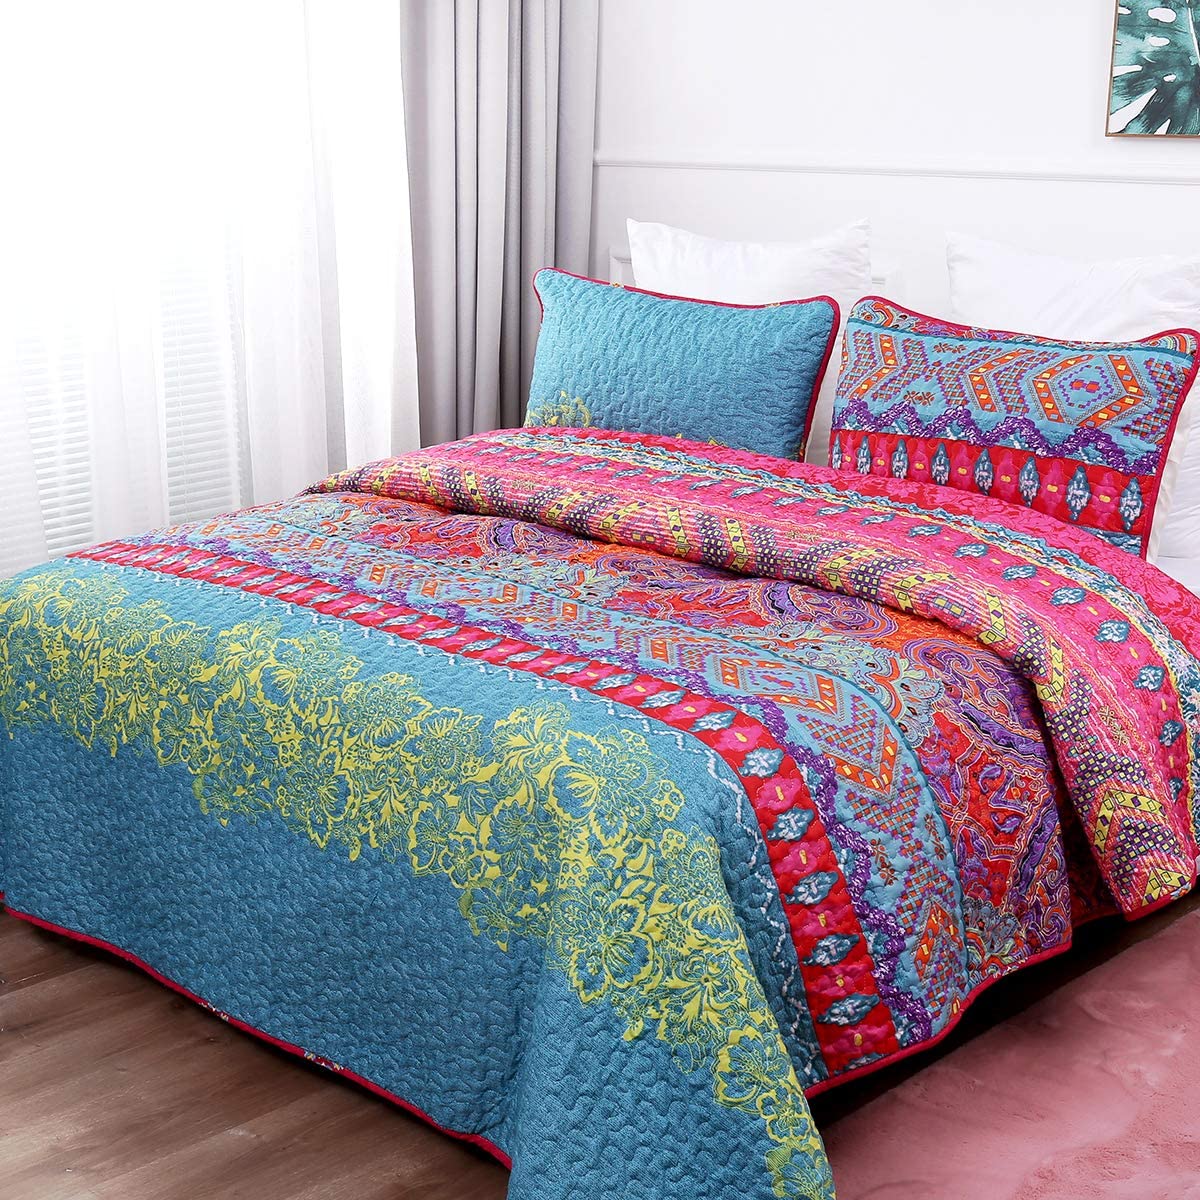 Bohemian Quilt Set Queen Pieces Boho Chic Pattern Printed Bedding